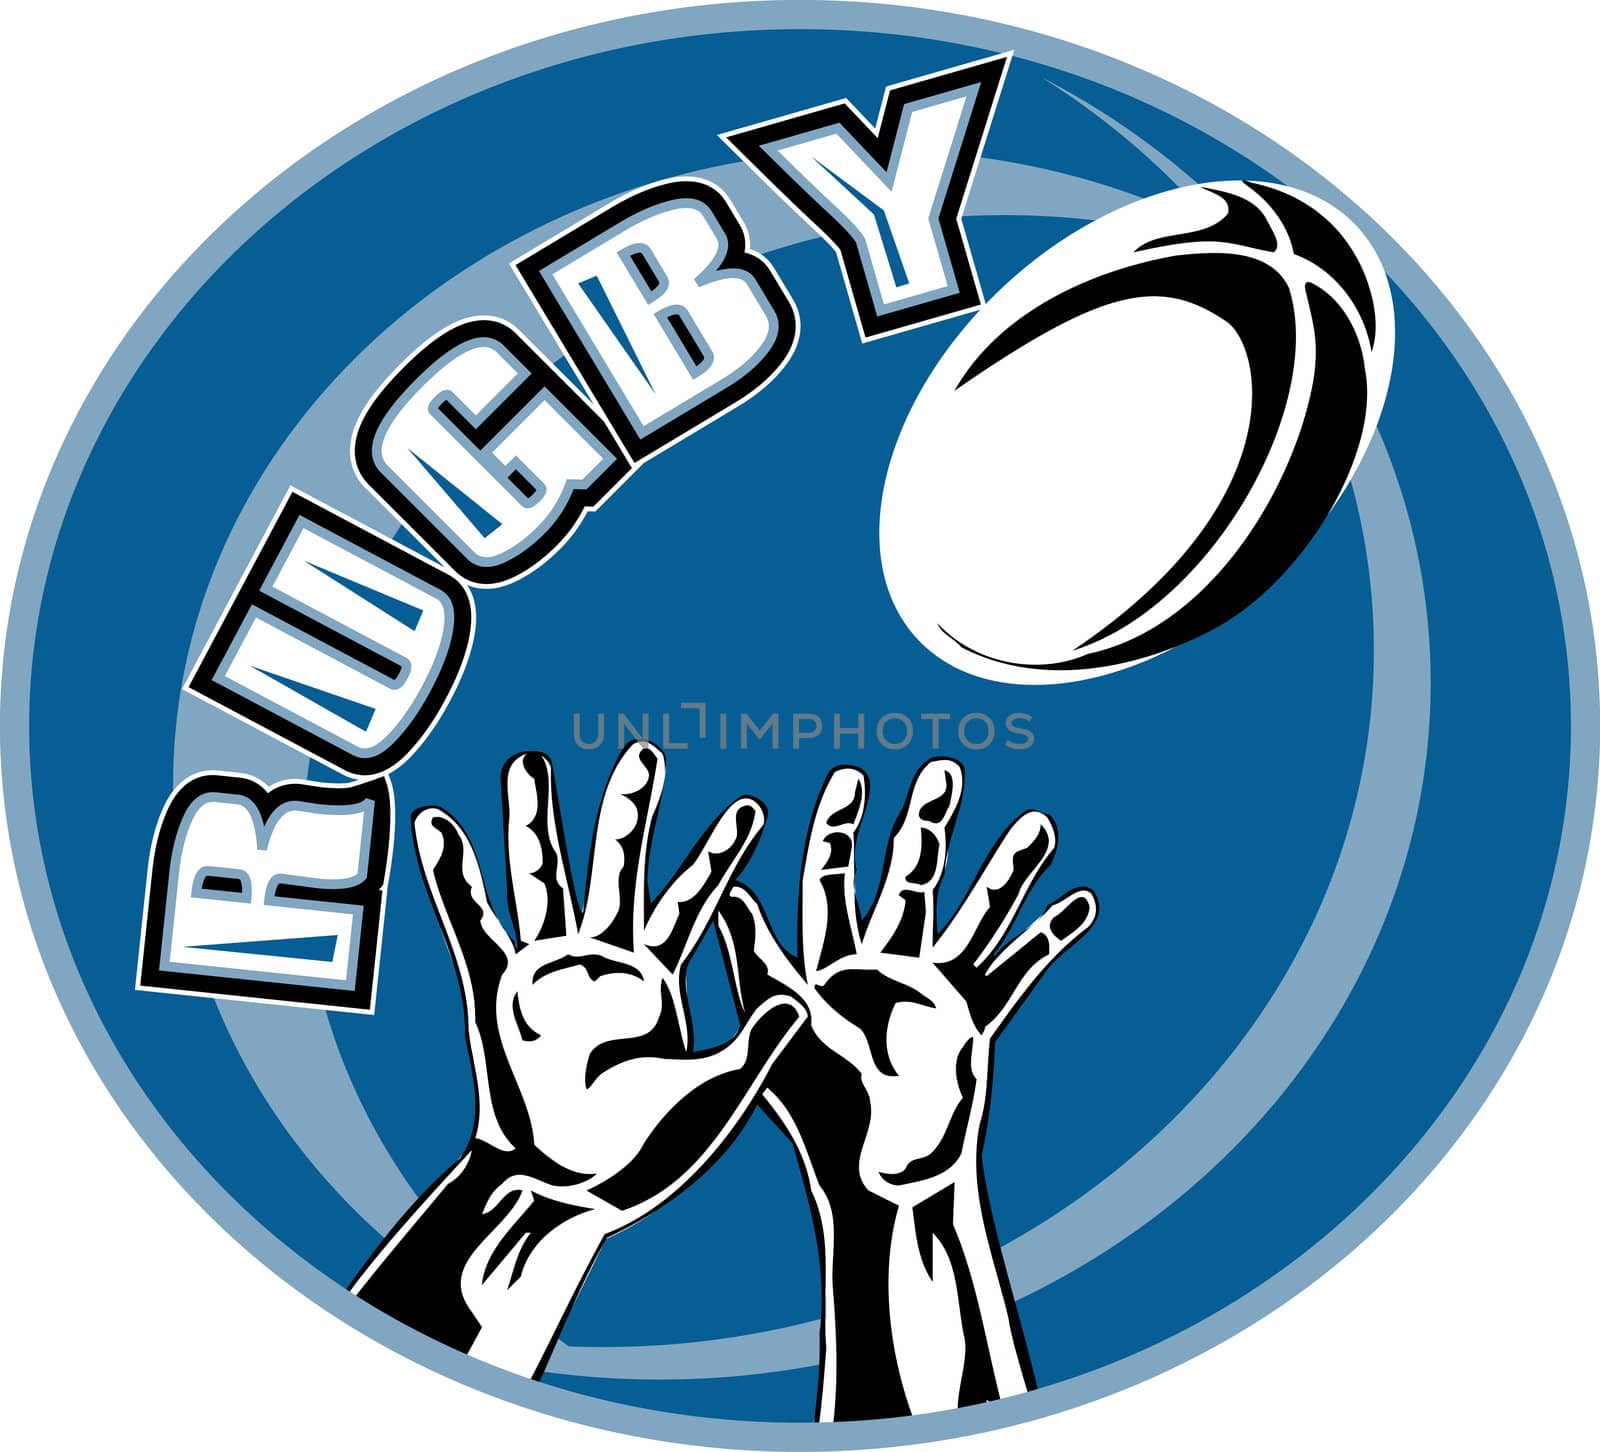 retro illustration style of rugby player two hands catching ball set inside oval with words "rugby"